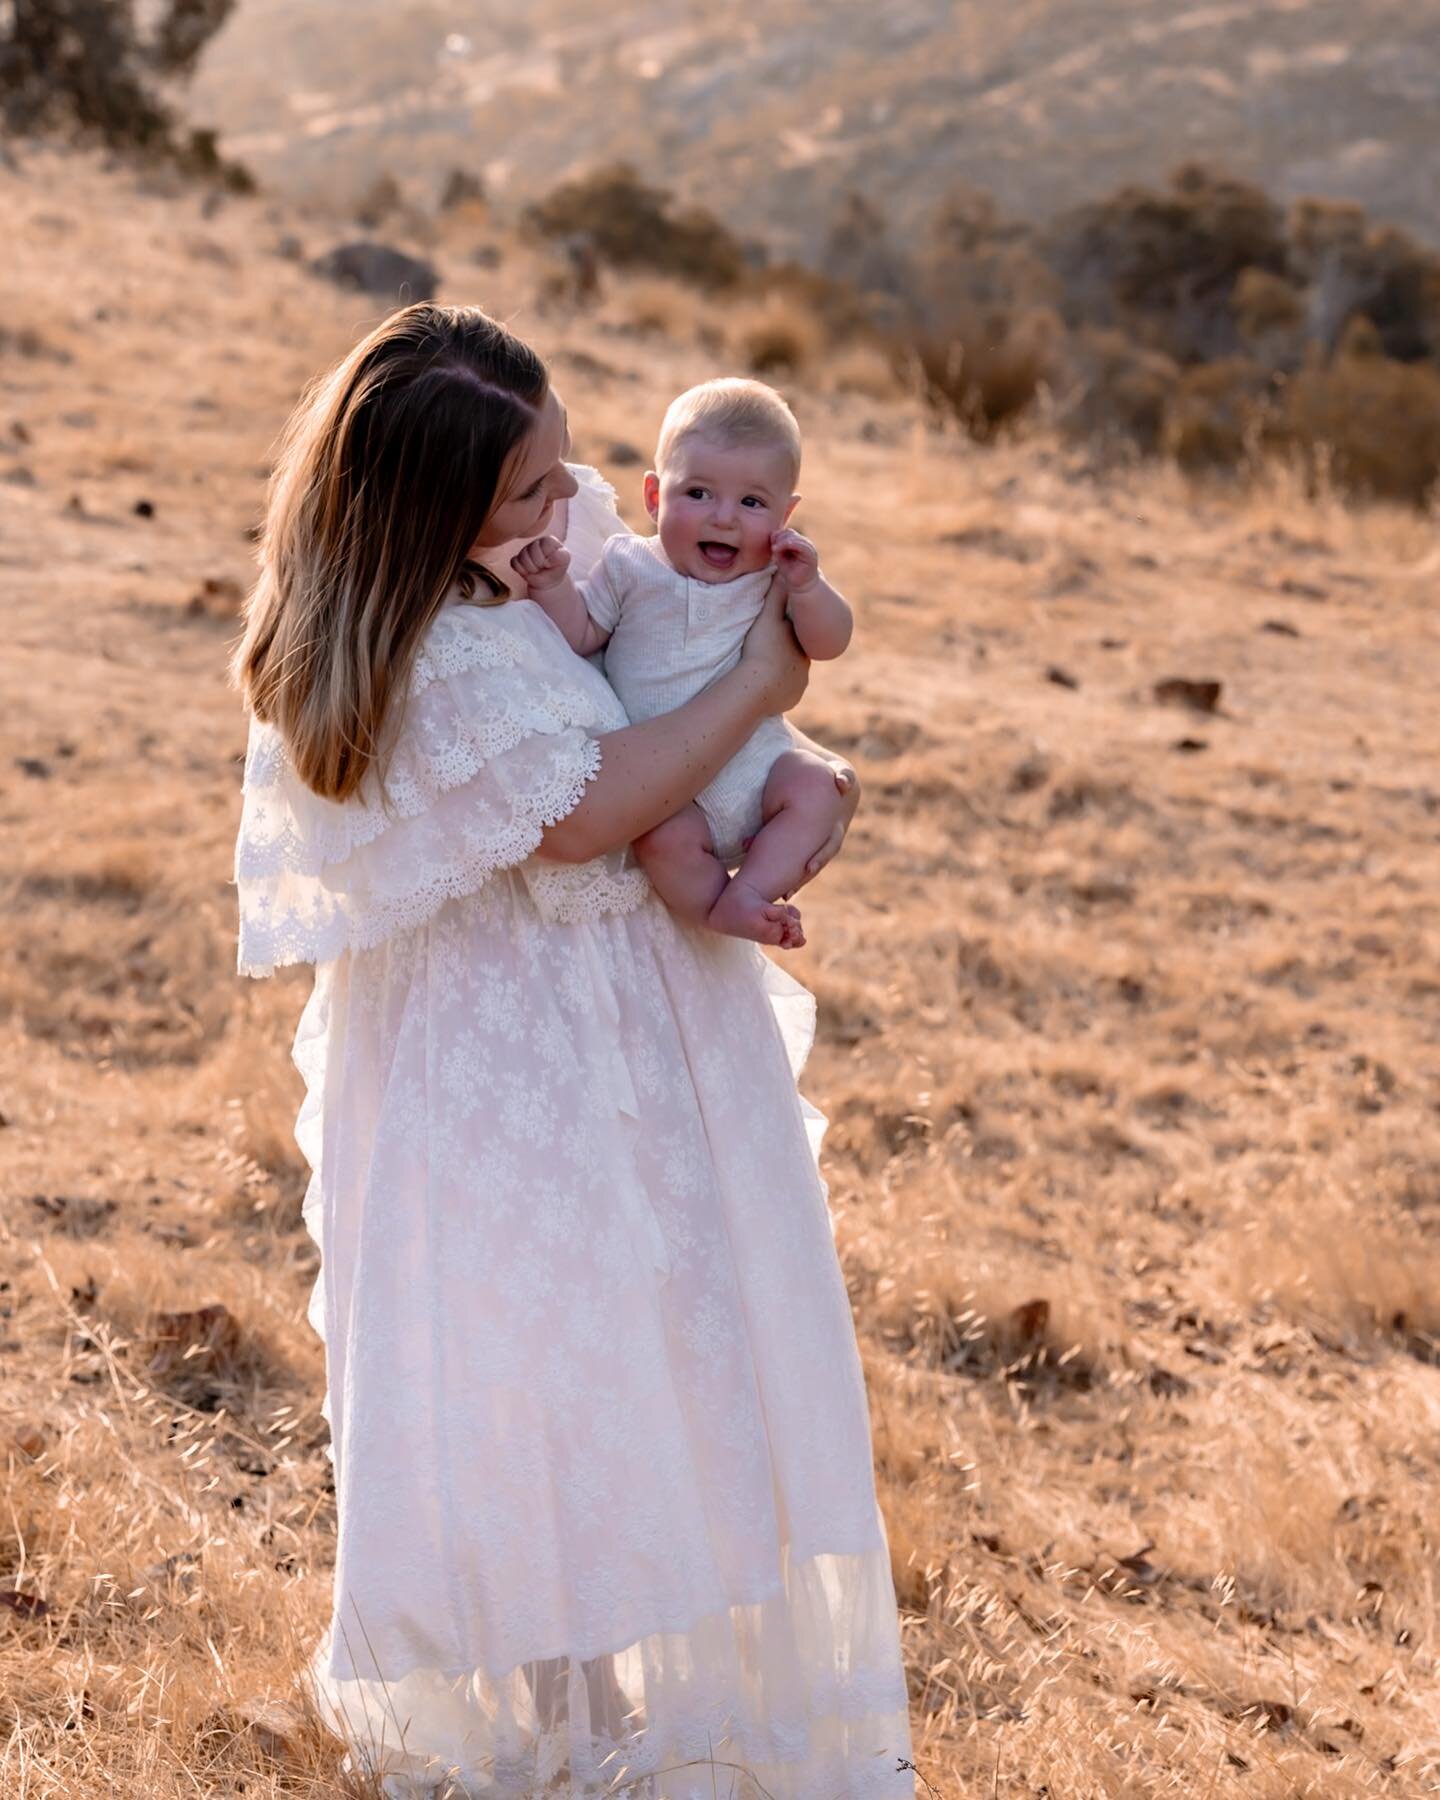 Capturing the raw beauty of motherhood amidst nature&rsquo;s rugged embrace. Every frame tells a story of love, strength, and the extraordinary journey of motherhood. 📷✨ #motherhoodthroughmylens 

Image&amp;editing: @katemcallister_photography 
Styl